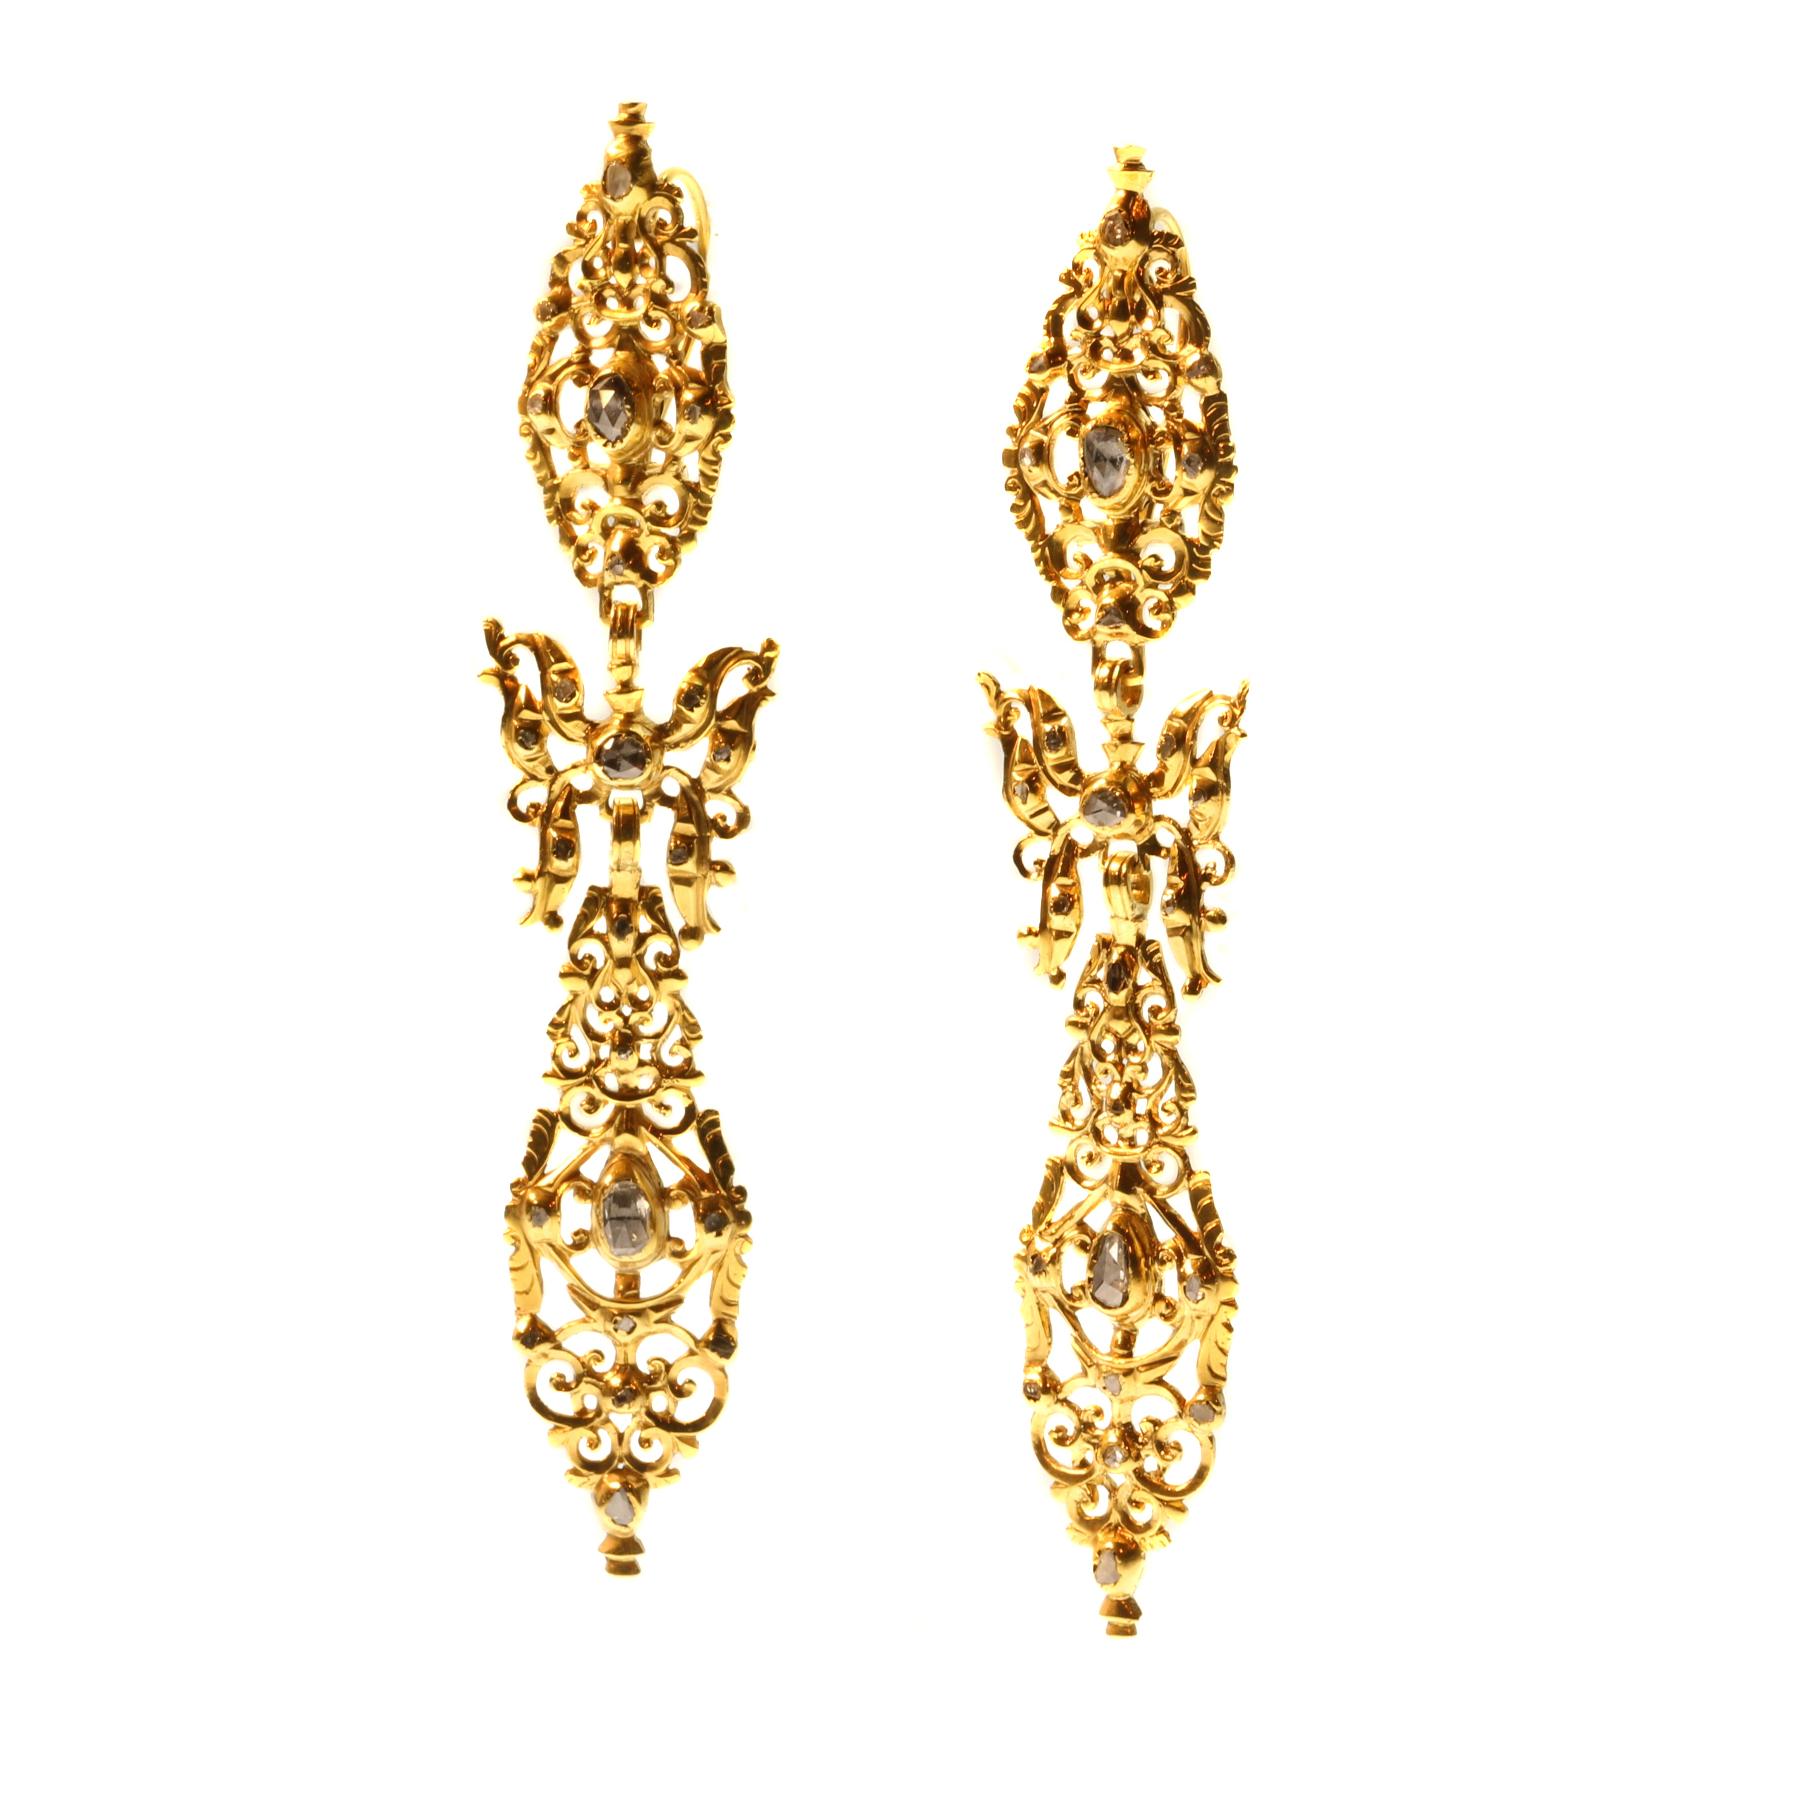 300 Yrs Old Antique Long Pendent Earrings with Rose Cut Diamonds High Carat Gold For Sale